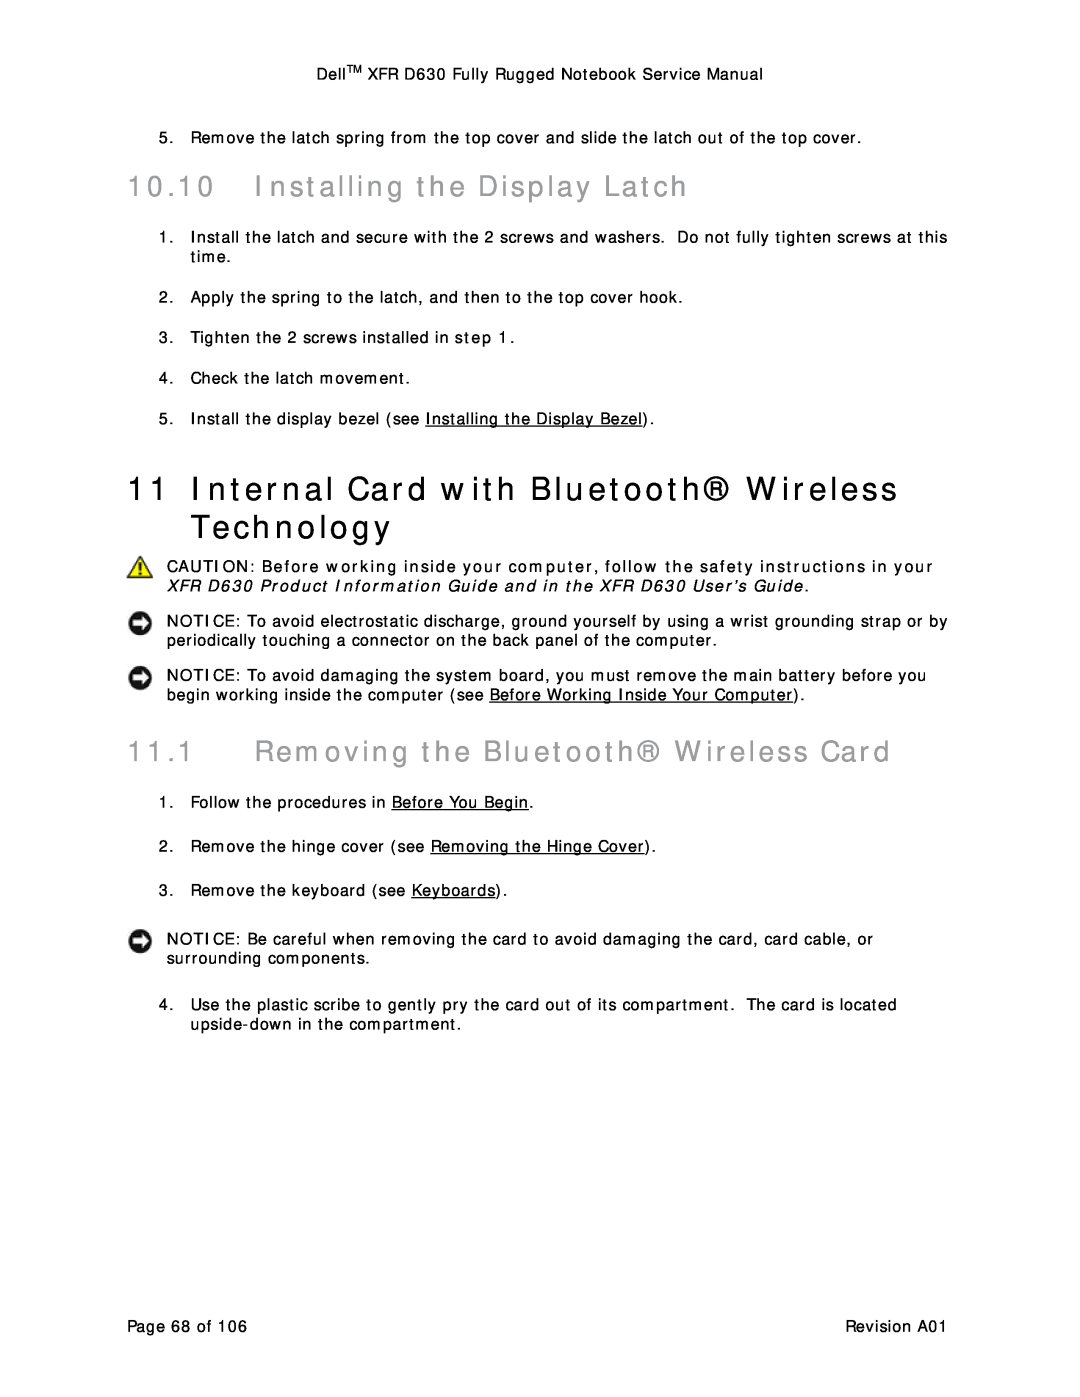 Dell D630 service manual Internal Card with Bluetooth Wireless Technology, Installing the Display Latch 